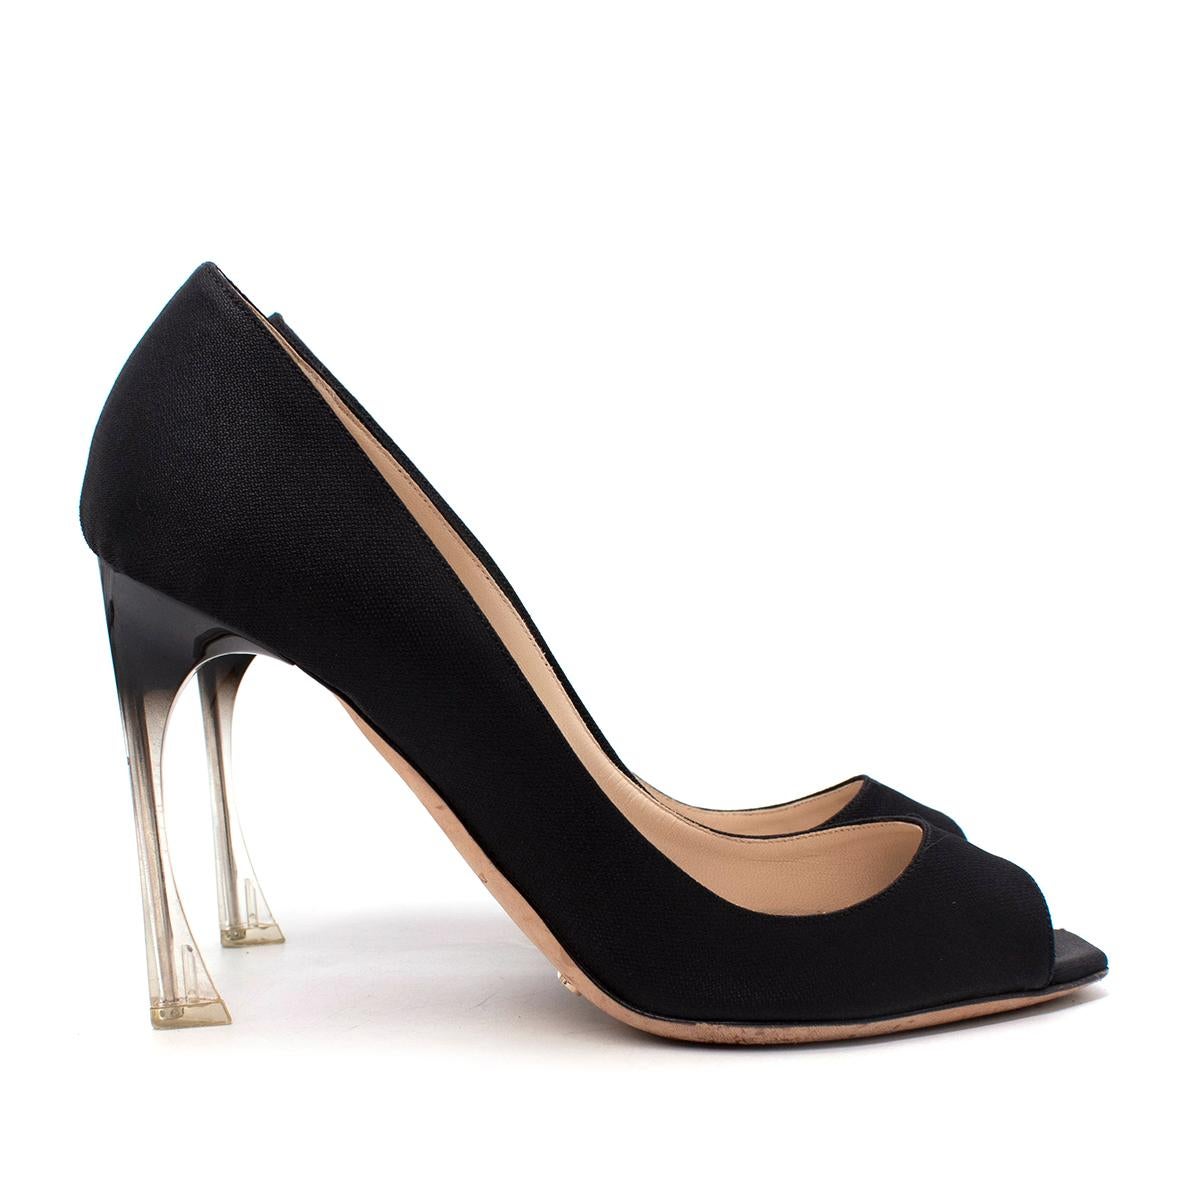 Christian Dior Black Peep Toe Transparent Heel Pumps

- Black jacquard upper 
- Square peep toe
- Black to transparent tone ombre high heel
- Leather insole

Materials:
Leather

Made in Italy

PLEASE NOTE, THESE ITEMS ARE PRE-OWNED AND MAY SHOW